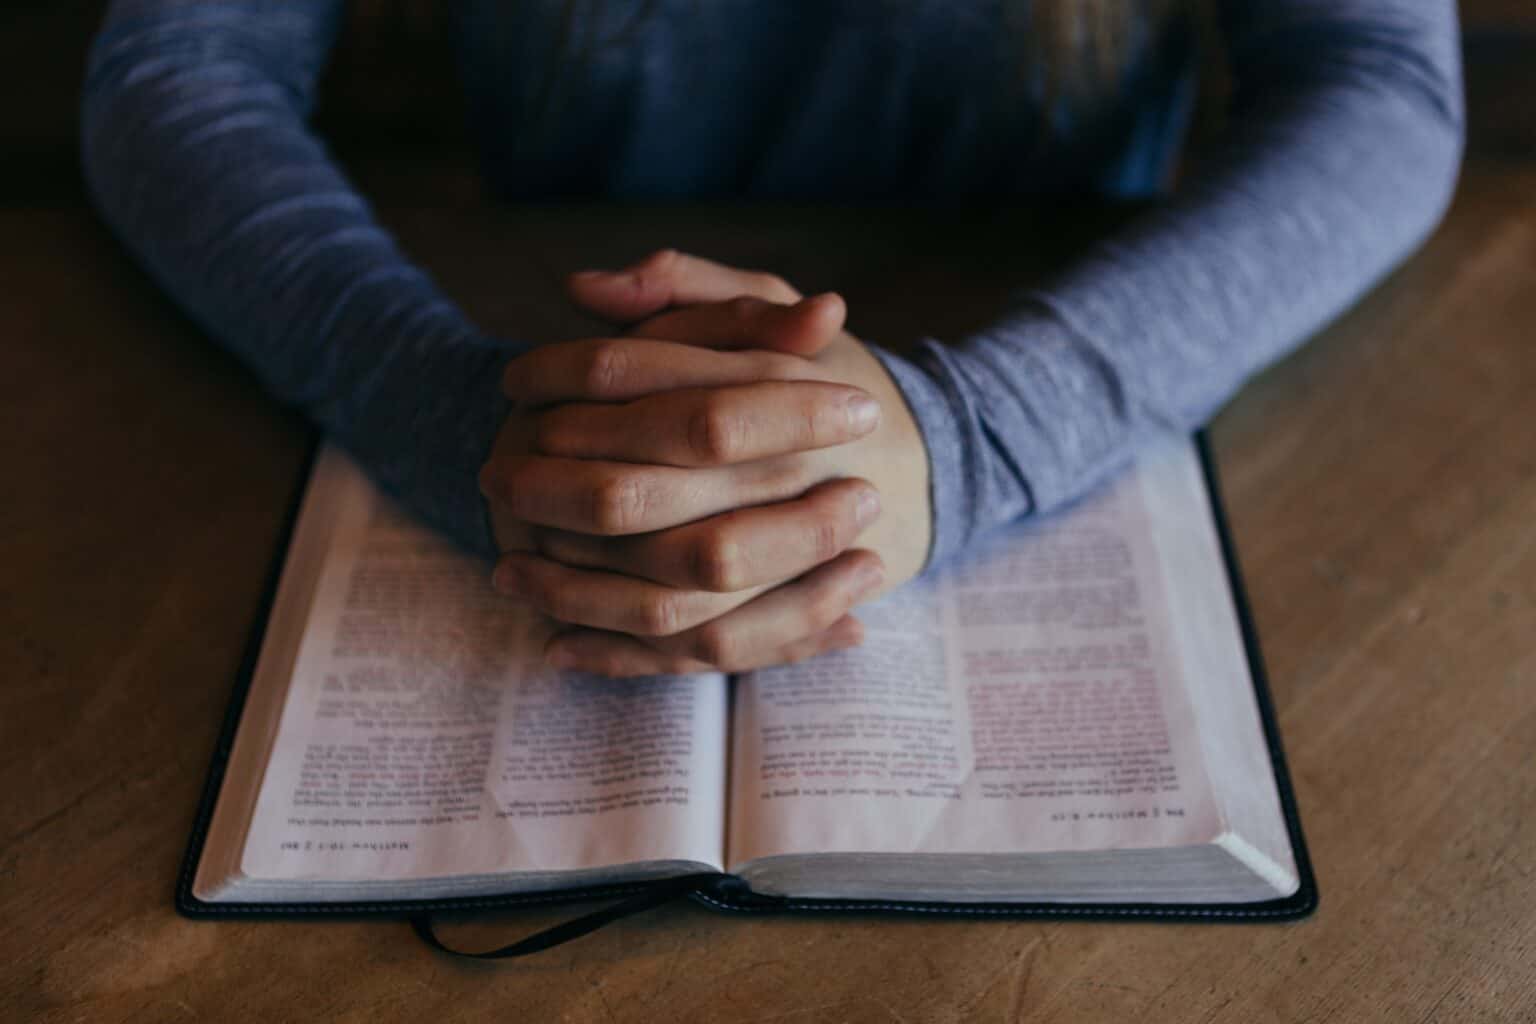 praying hands resting on top of an open bible